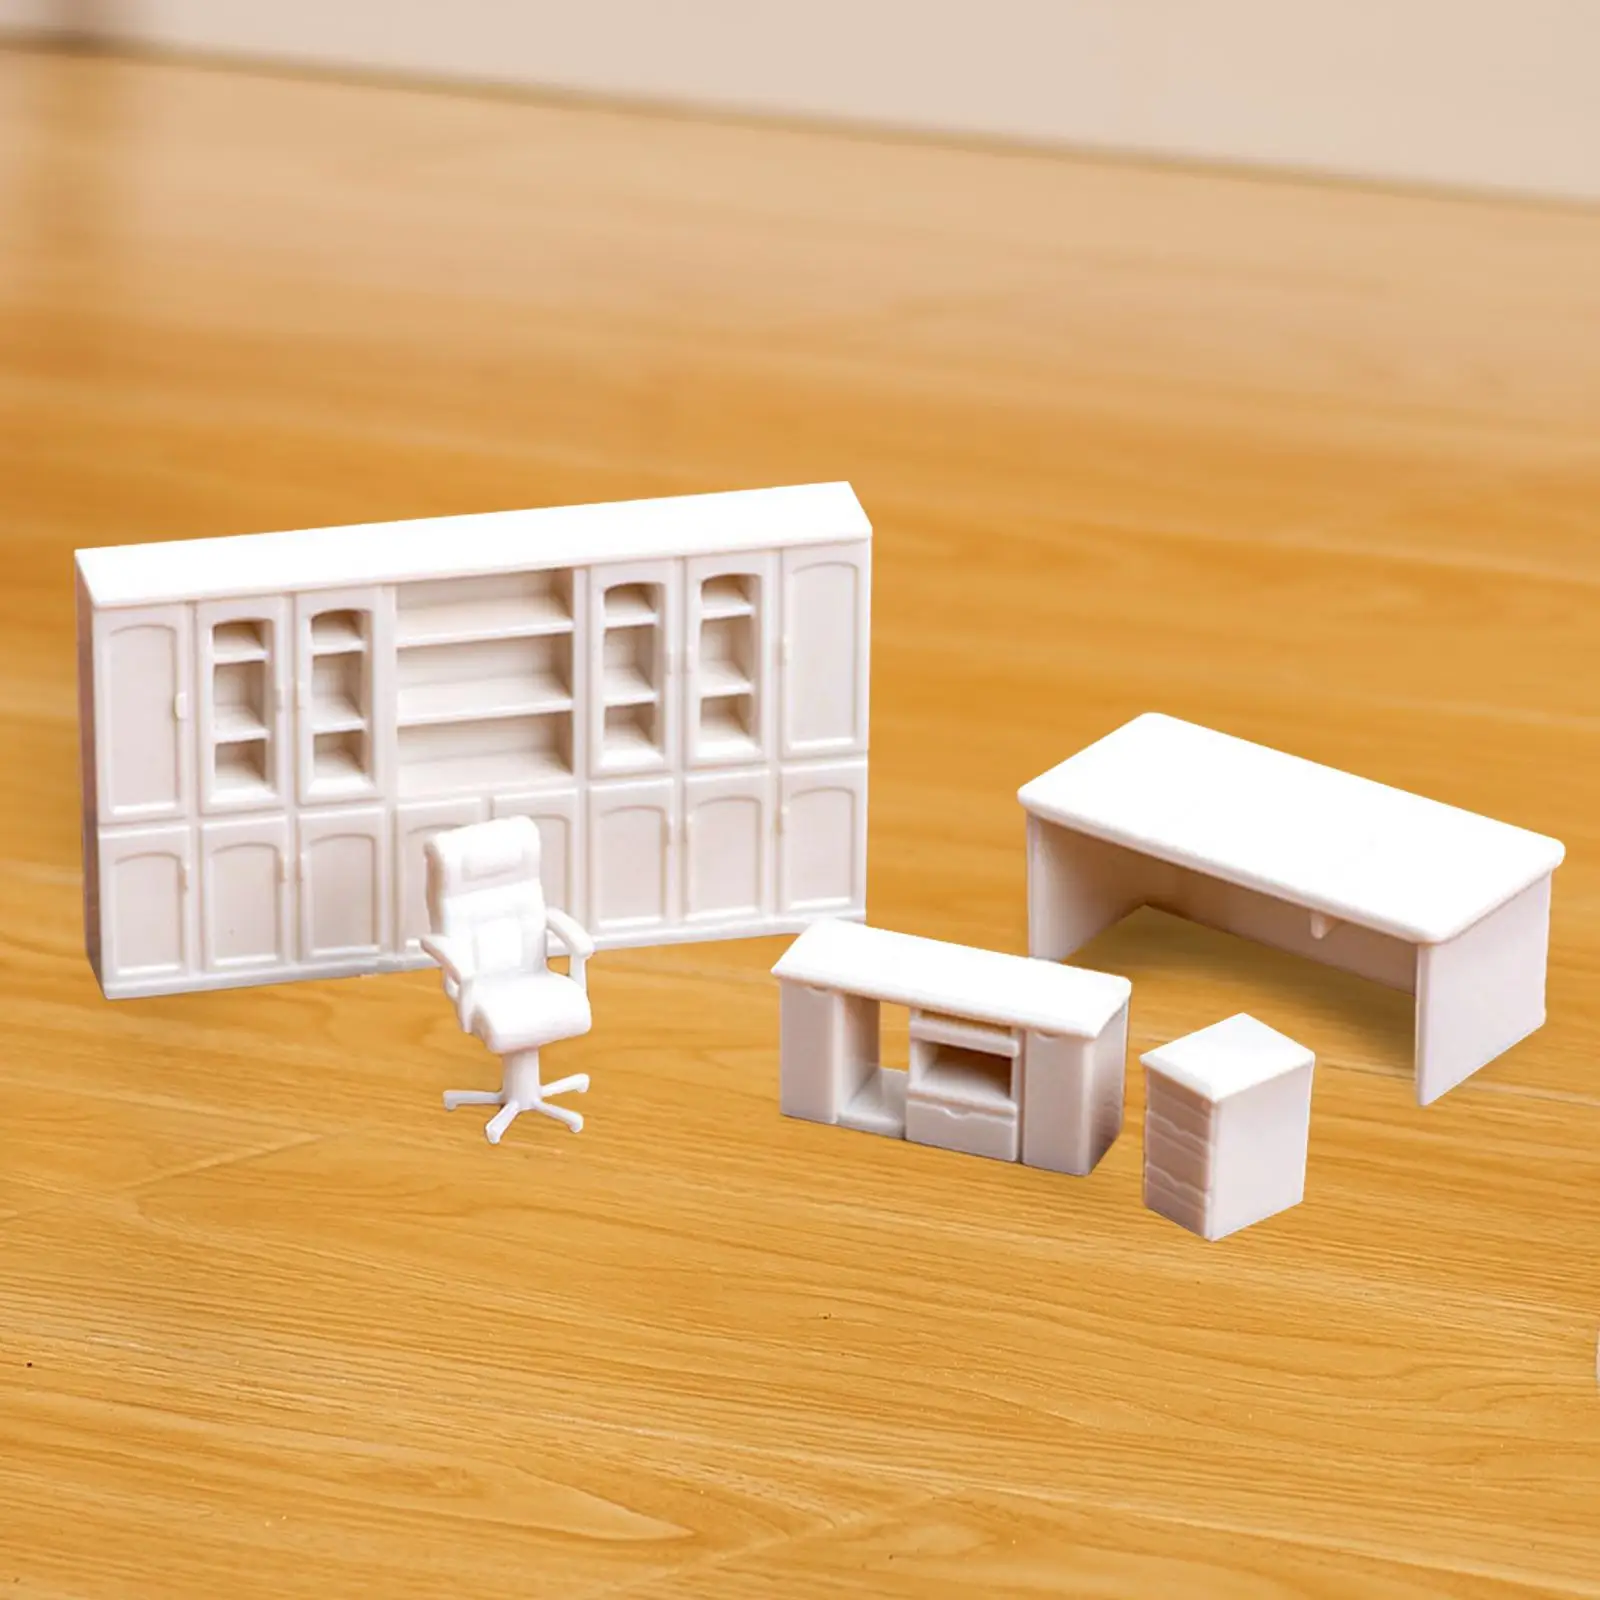 1/50 Scale Furniture Model Resin 1:50 Scale Miniature Furniture for DIY Scene Ornament Photography Props Sand Table Decoration